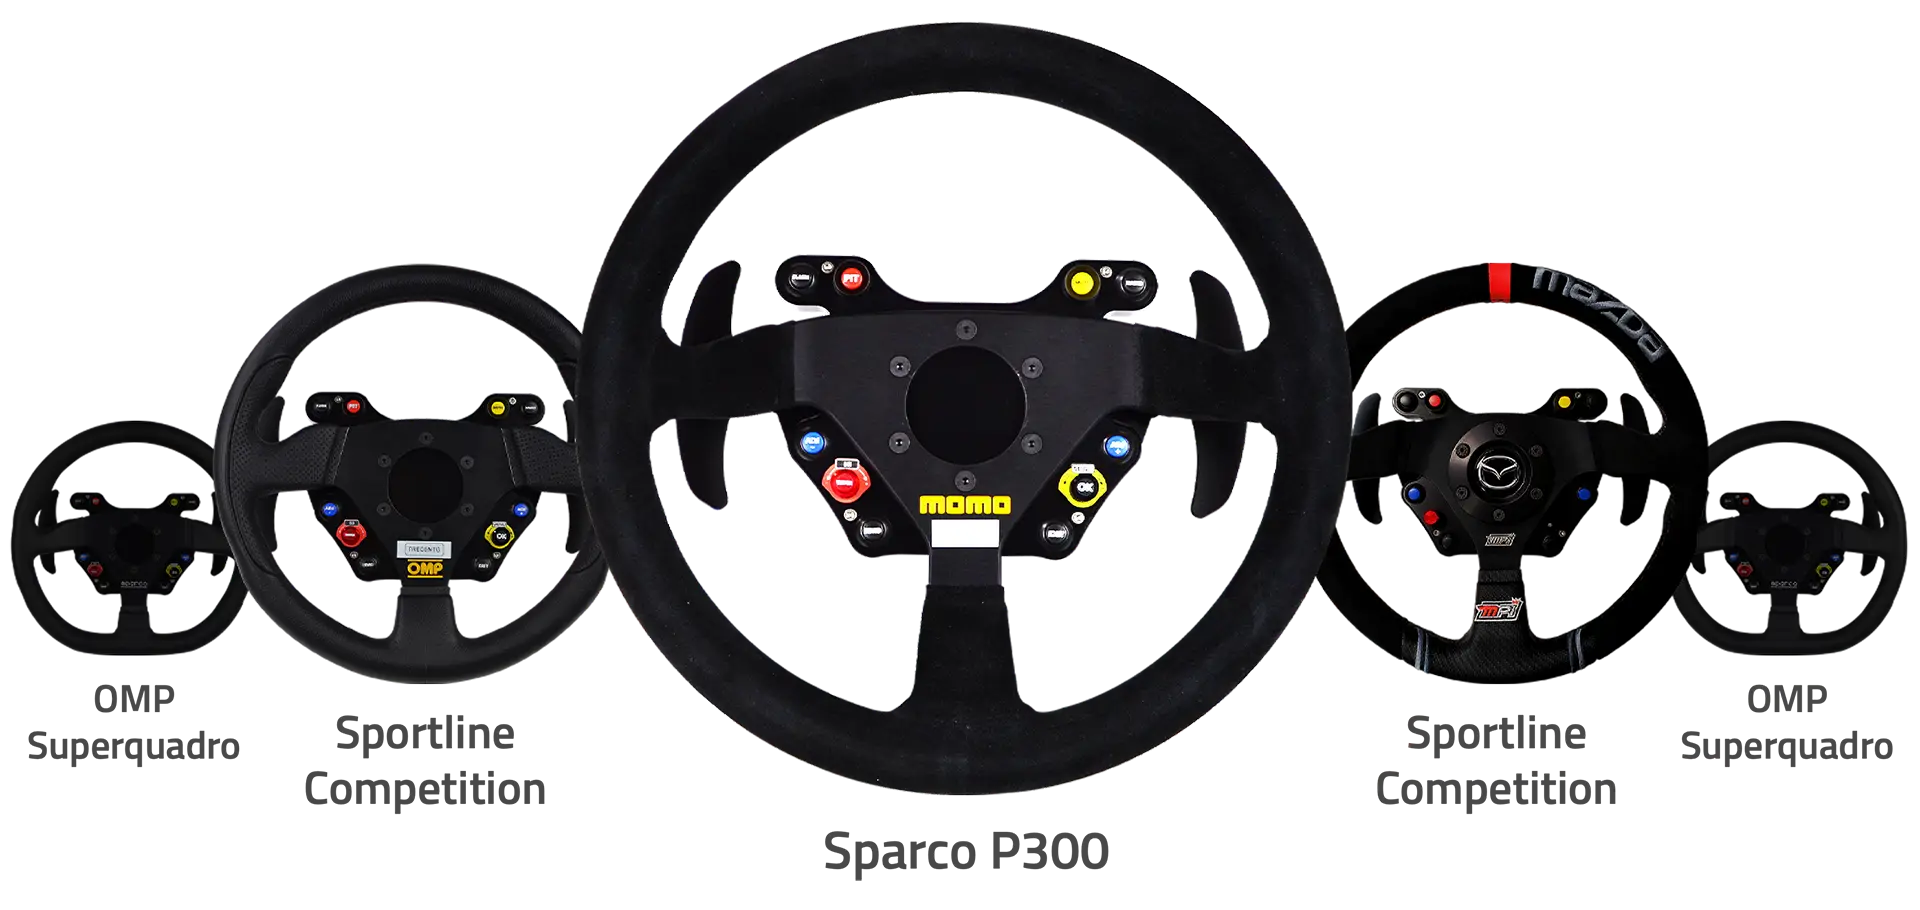 Diagram of 5 motorsport steering wheels. They are black against a white background